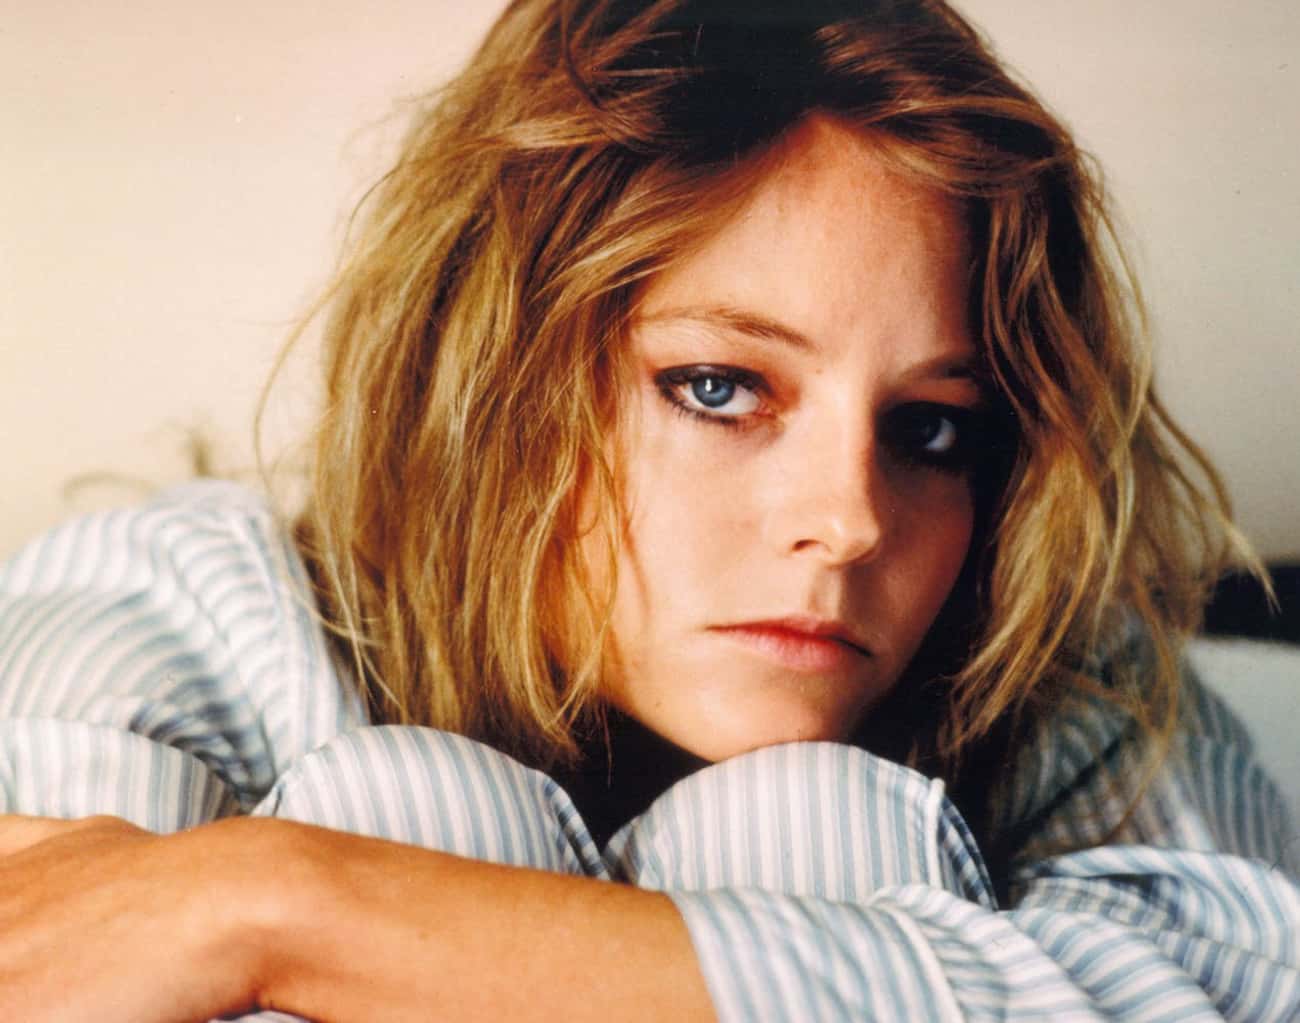 Young Jodie Foster in Blue and White Striped Pajamas